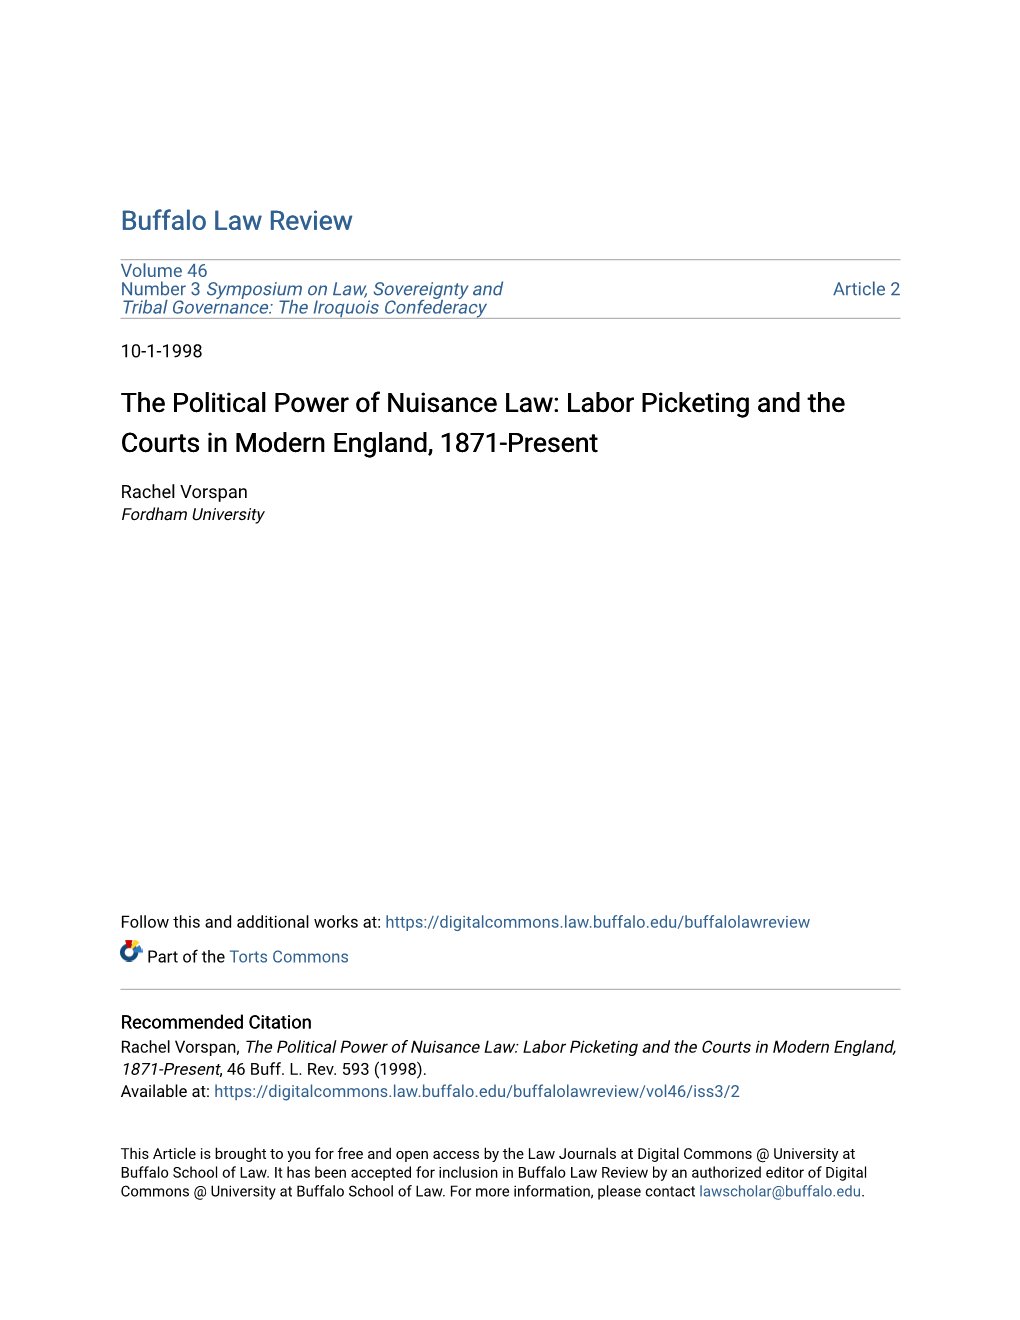 The Political Power of Nuisance Law: Labor Picketing and the Courts in Modern England, 1871-Present